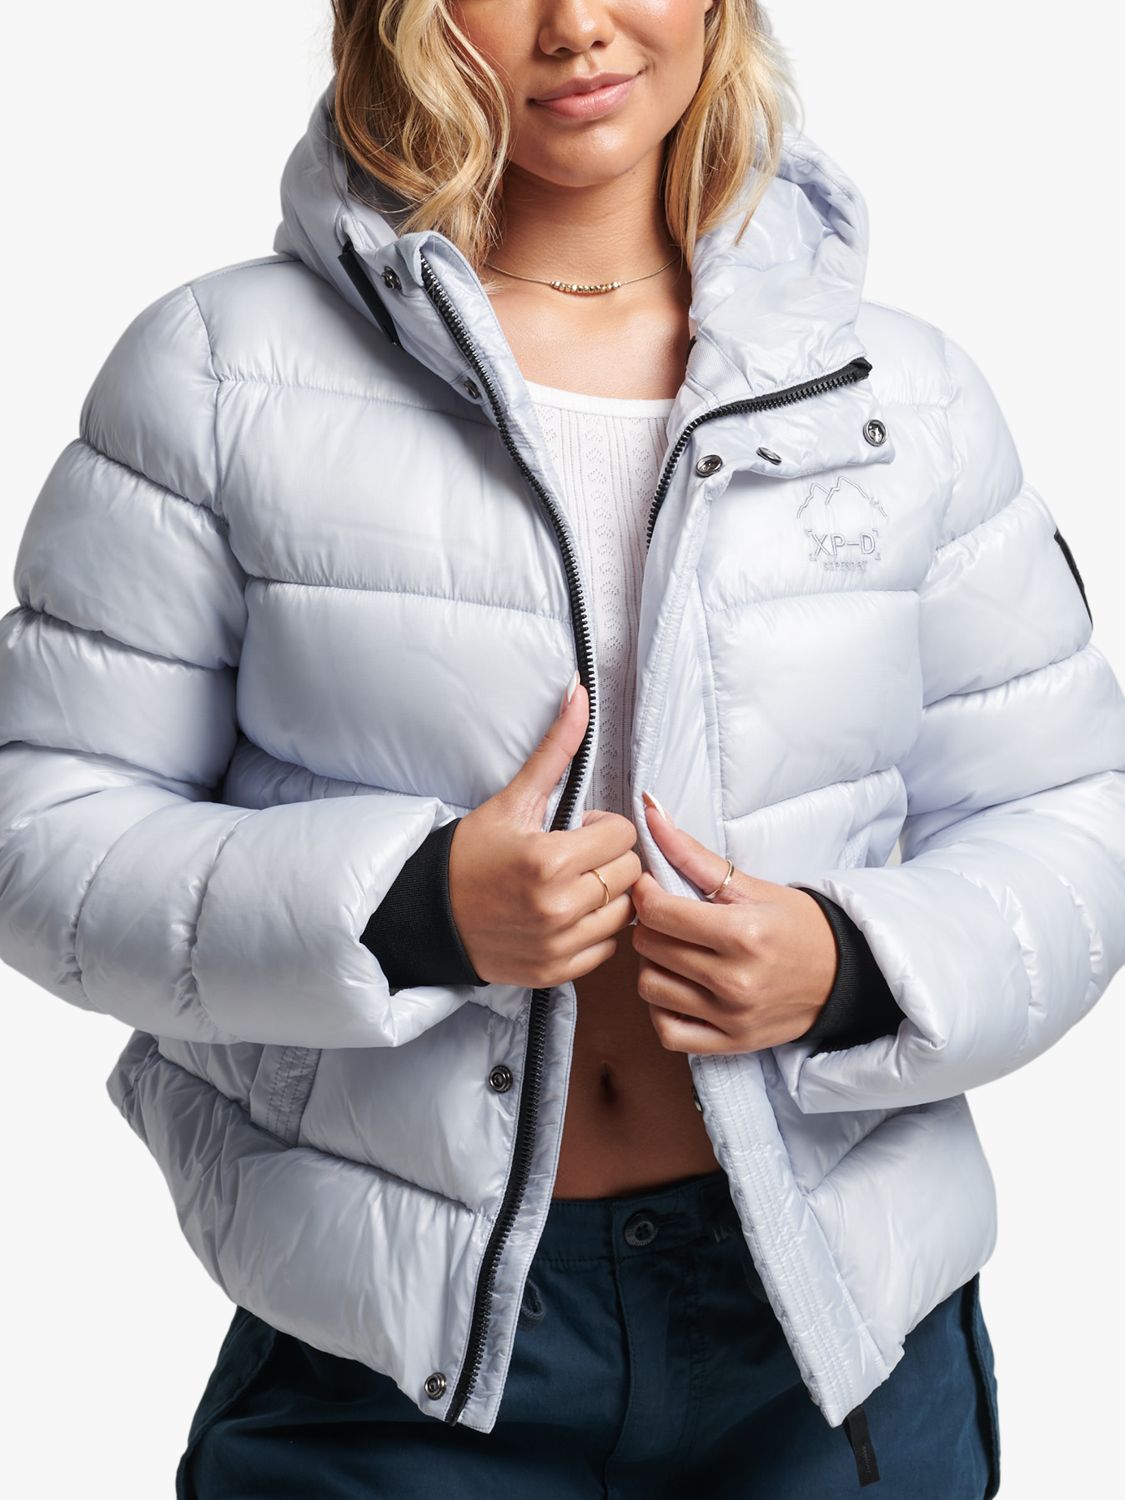 Womens - Sub Arctic Super Down Jacket in Charcoal/black, Superdry UK